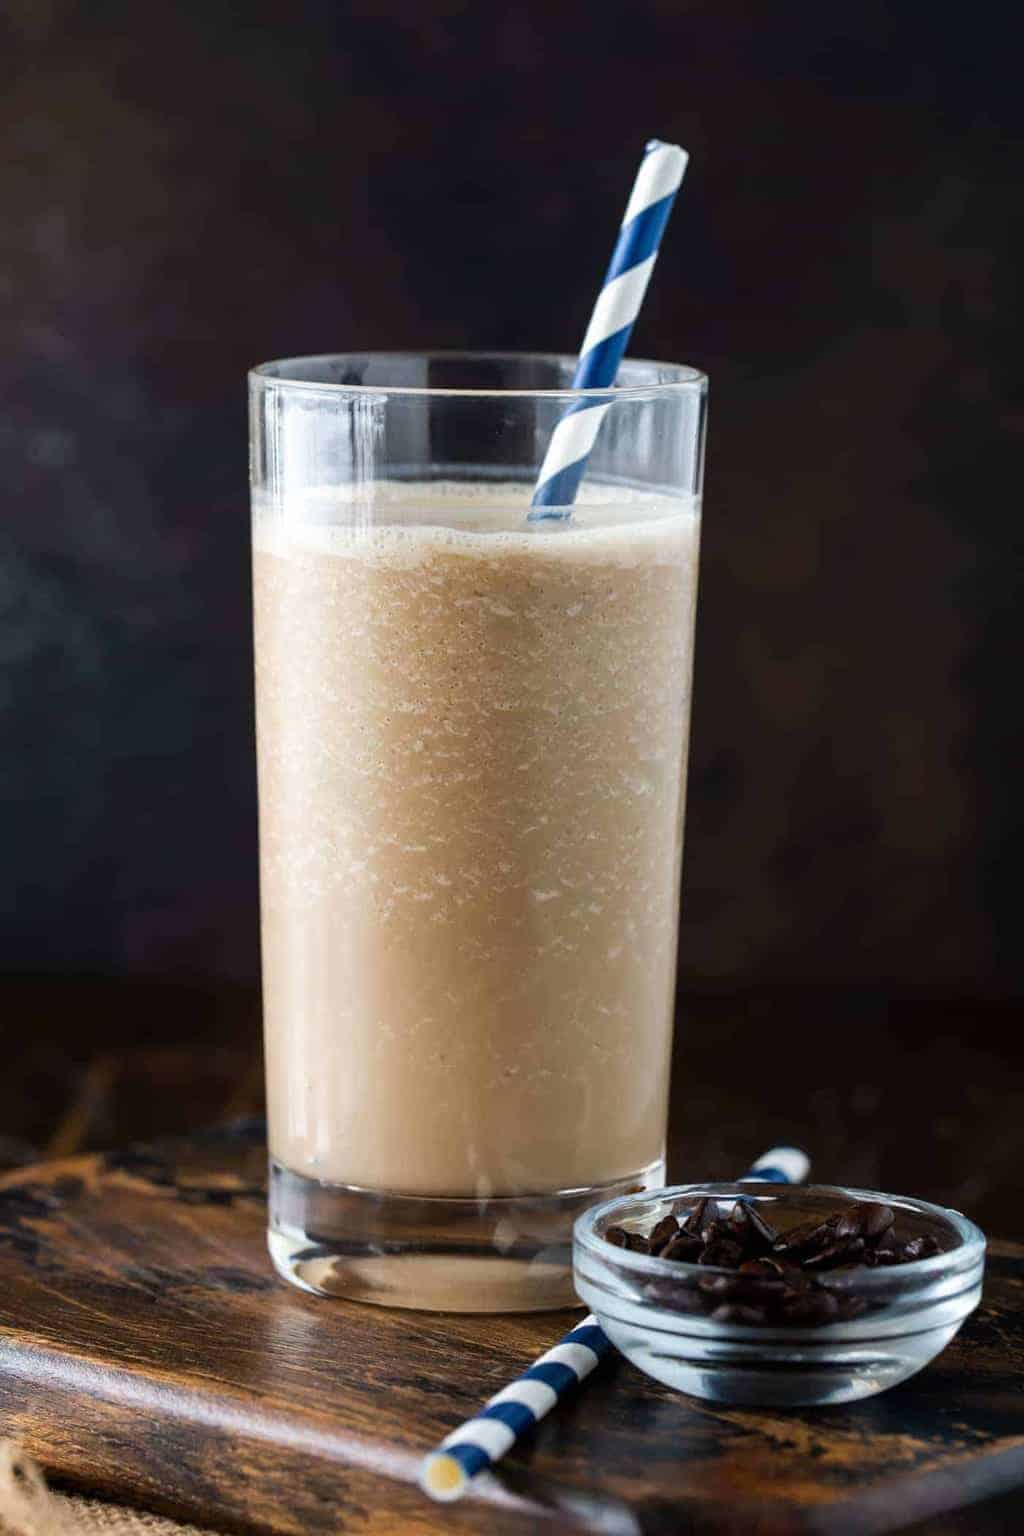  Coffee Smoothie in a high ball glass on a dark background.